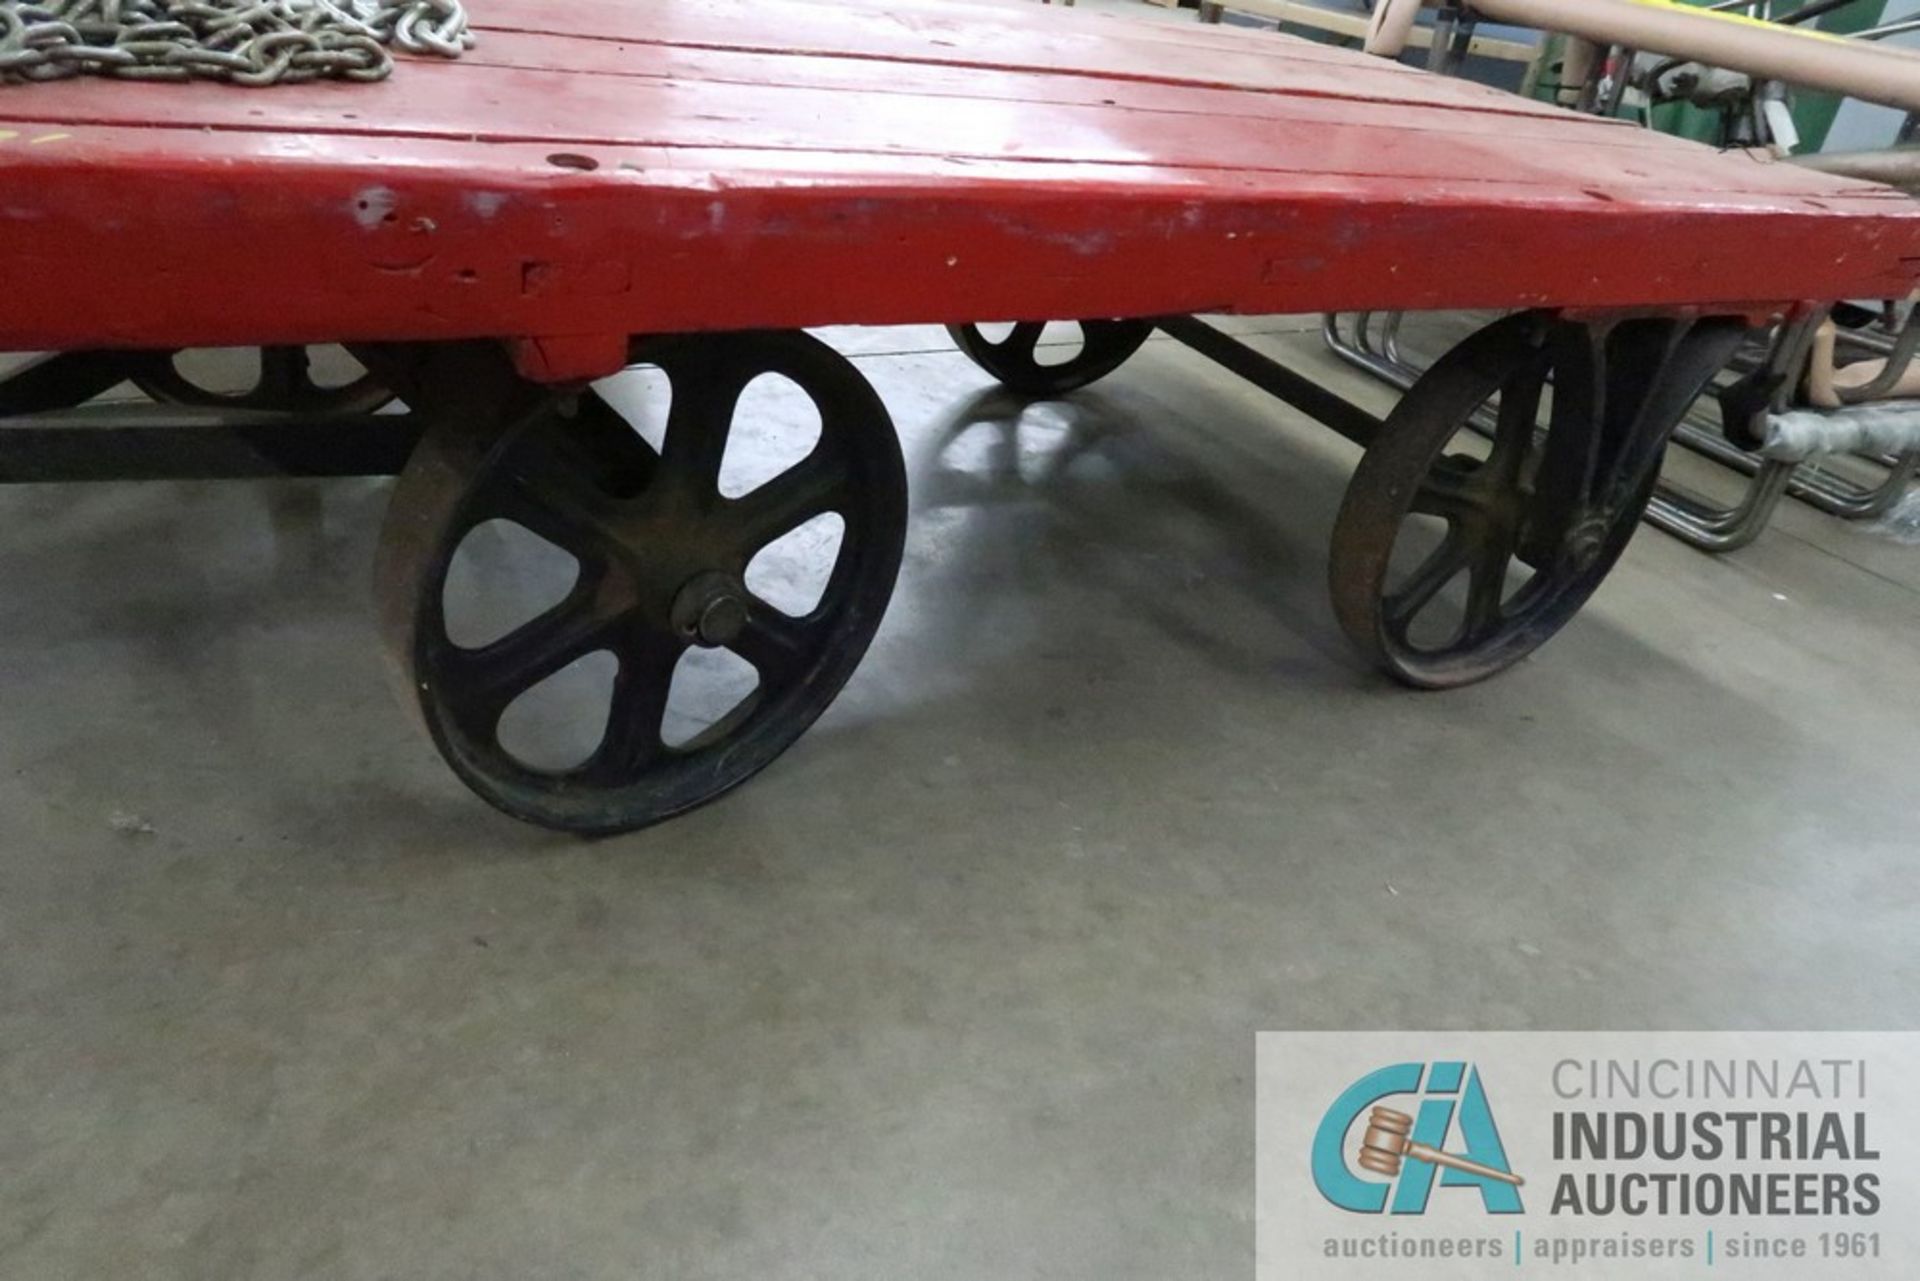 36" X 60" ANTIQUE WOOD RAILROAD/INDUSTRIAL CART - Image 2 of 2